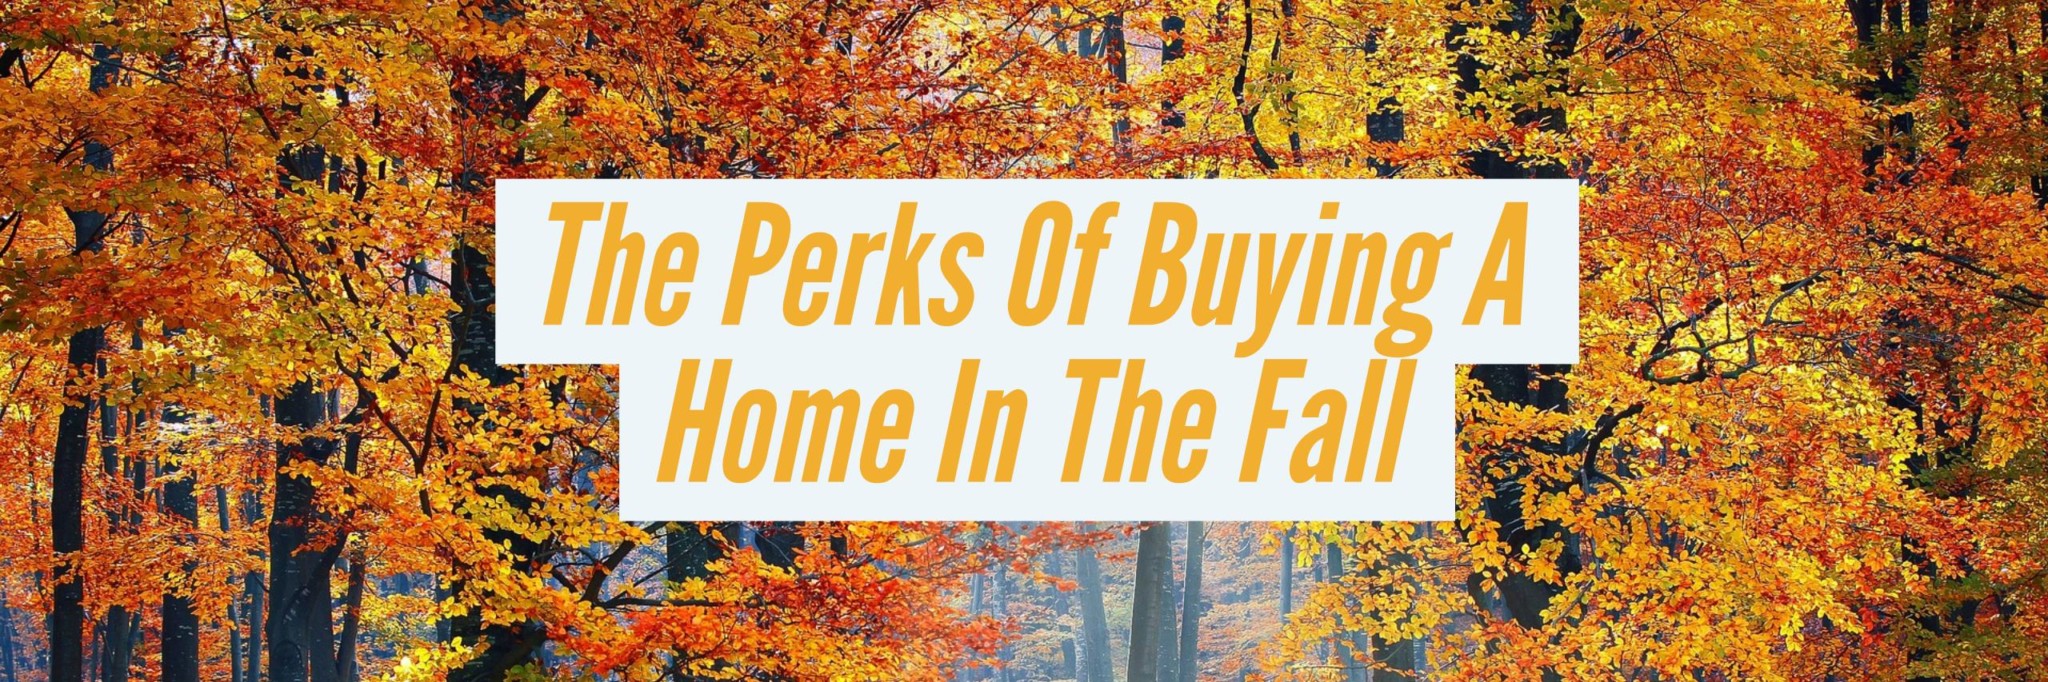 Fall Home Buying; A Great Option